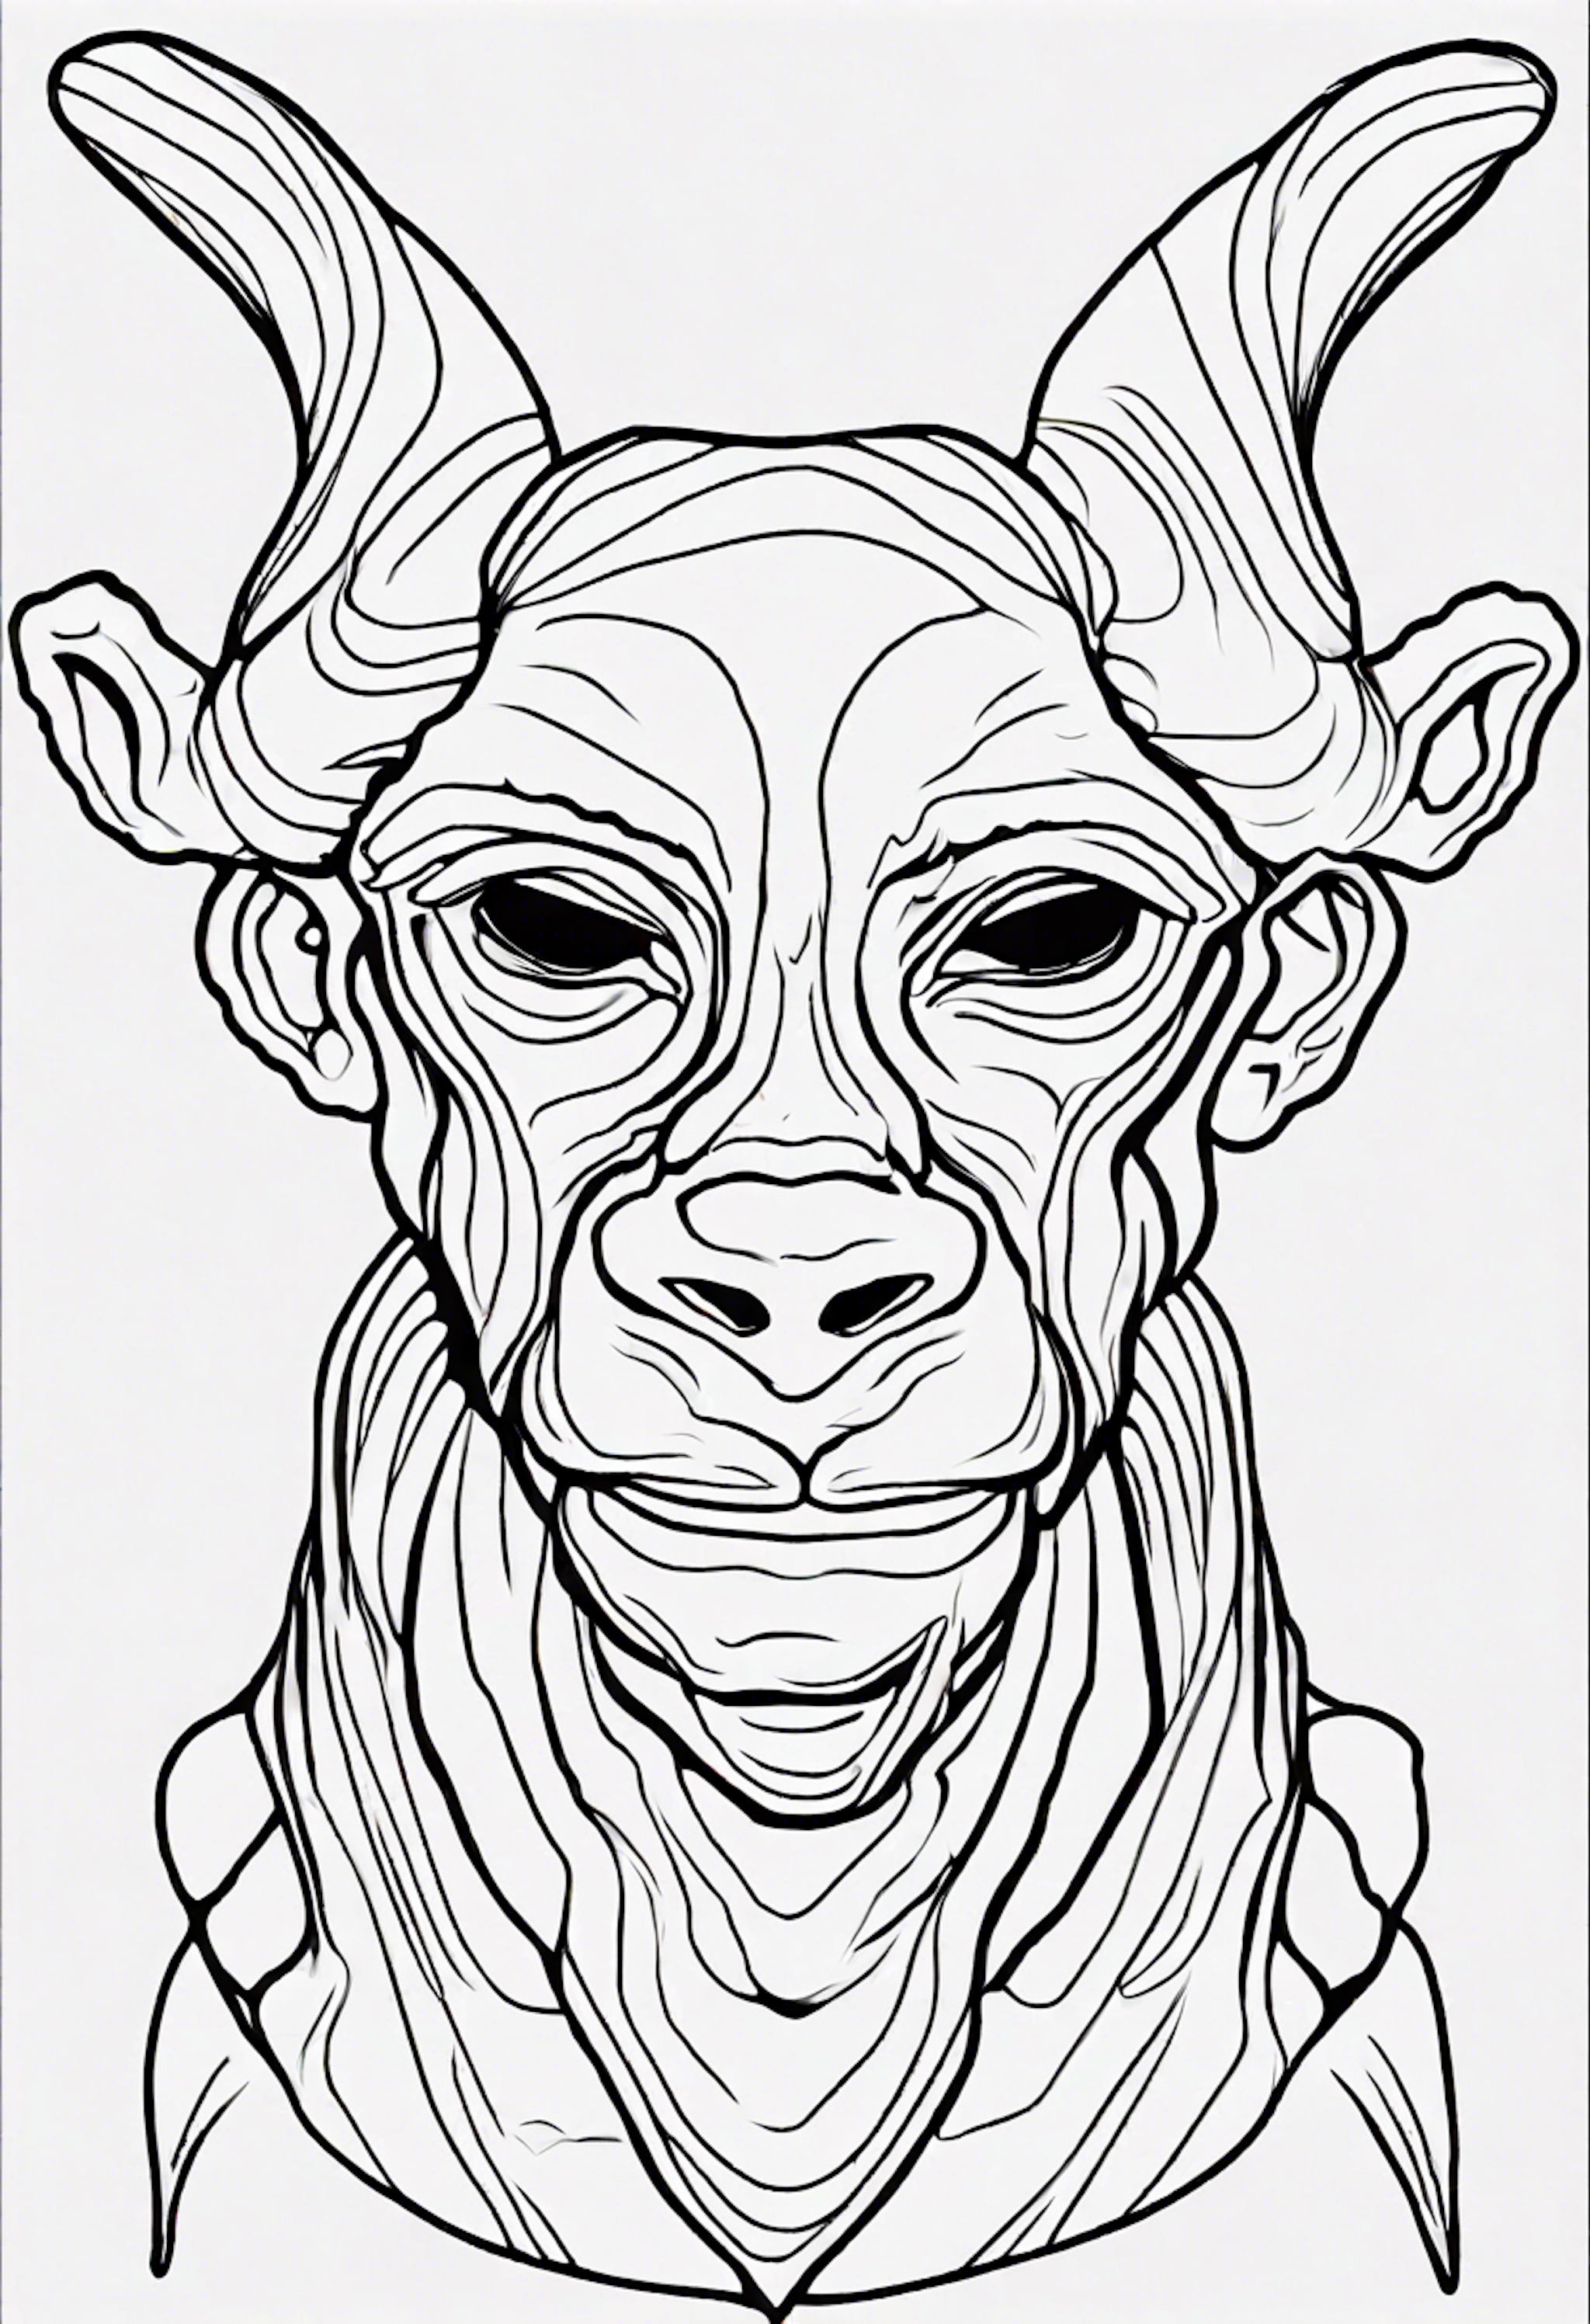 A coloring page for 1 Easy coloring pages